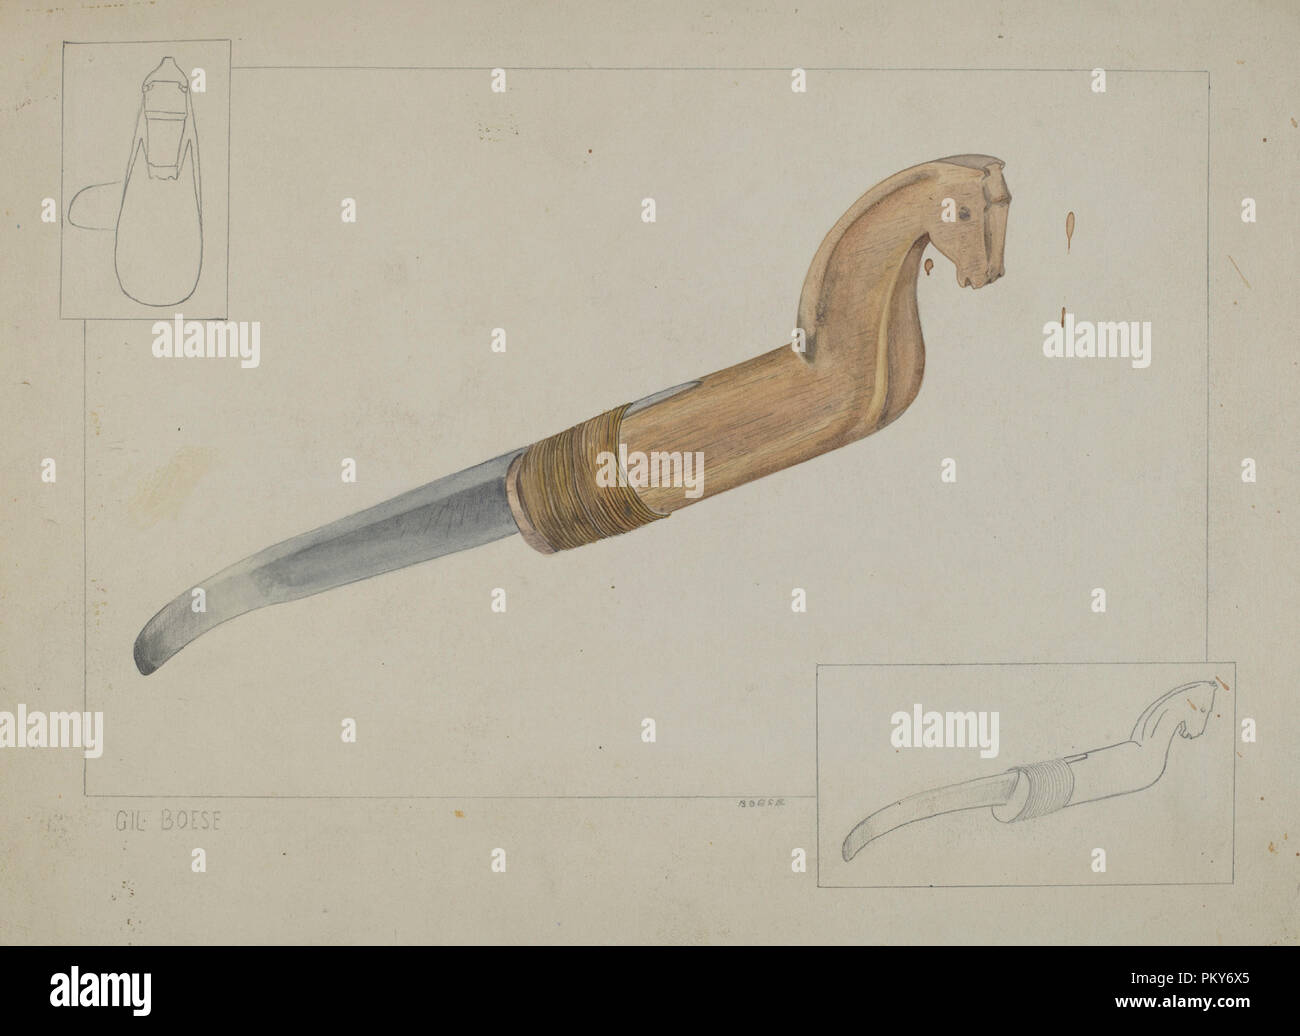 Drawknife. Dated: c. 1937. Dimensions: overall: 22.9 x 30.5 cm (9 x 12 in.). Medium: watercolor and graphite on paper. Museum: National Gallery of Art, Washington DC. Author: Gilbert Boese. Stock Photo